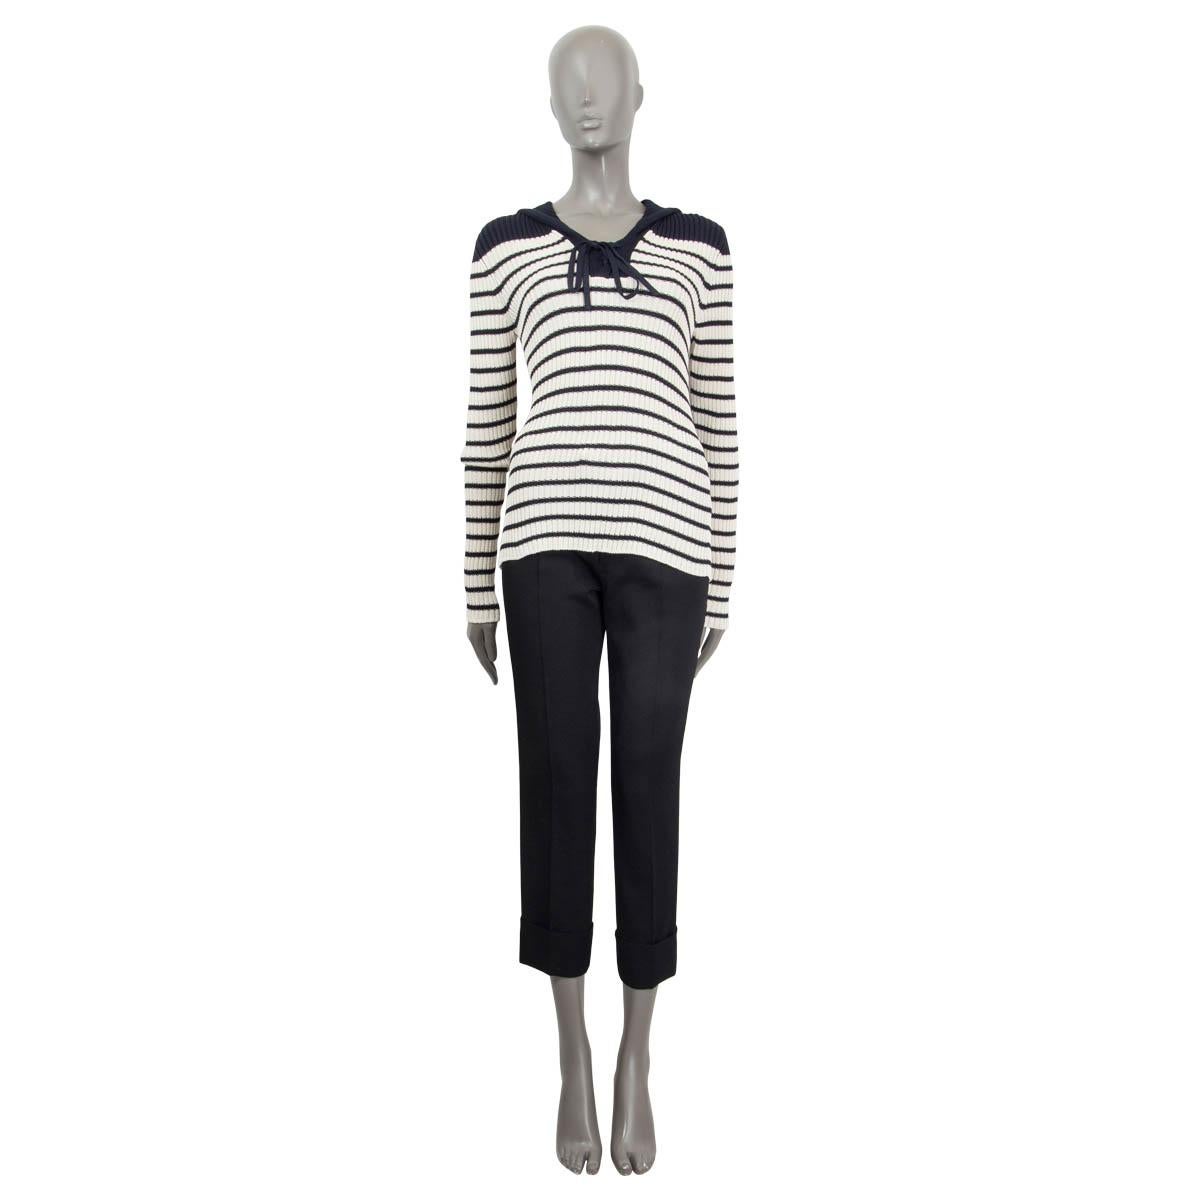  100% authentic Christian Dior Resort 2022 striped Mariniere sweater in navy and white cotton (100%). Unlined and stretchy. Features cotton straps on the front collar and typical monogram sailor flap on the back. Unworn and in excellent condition.